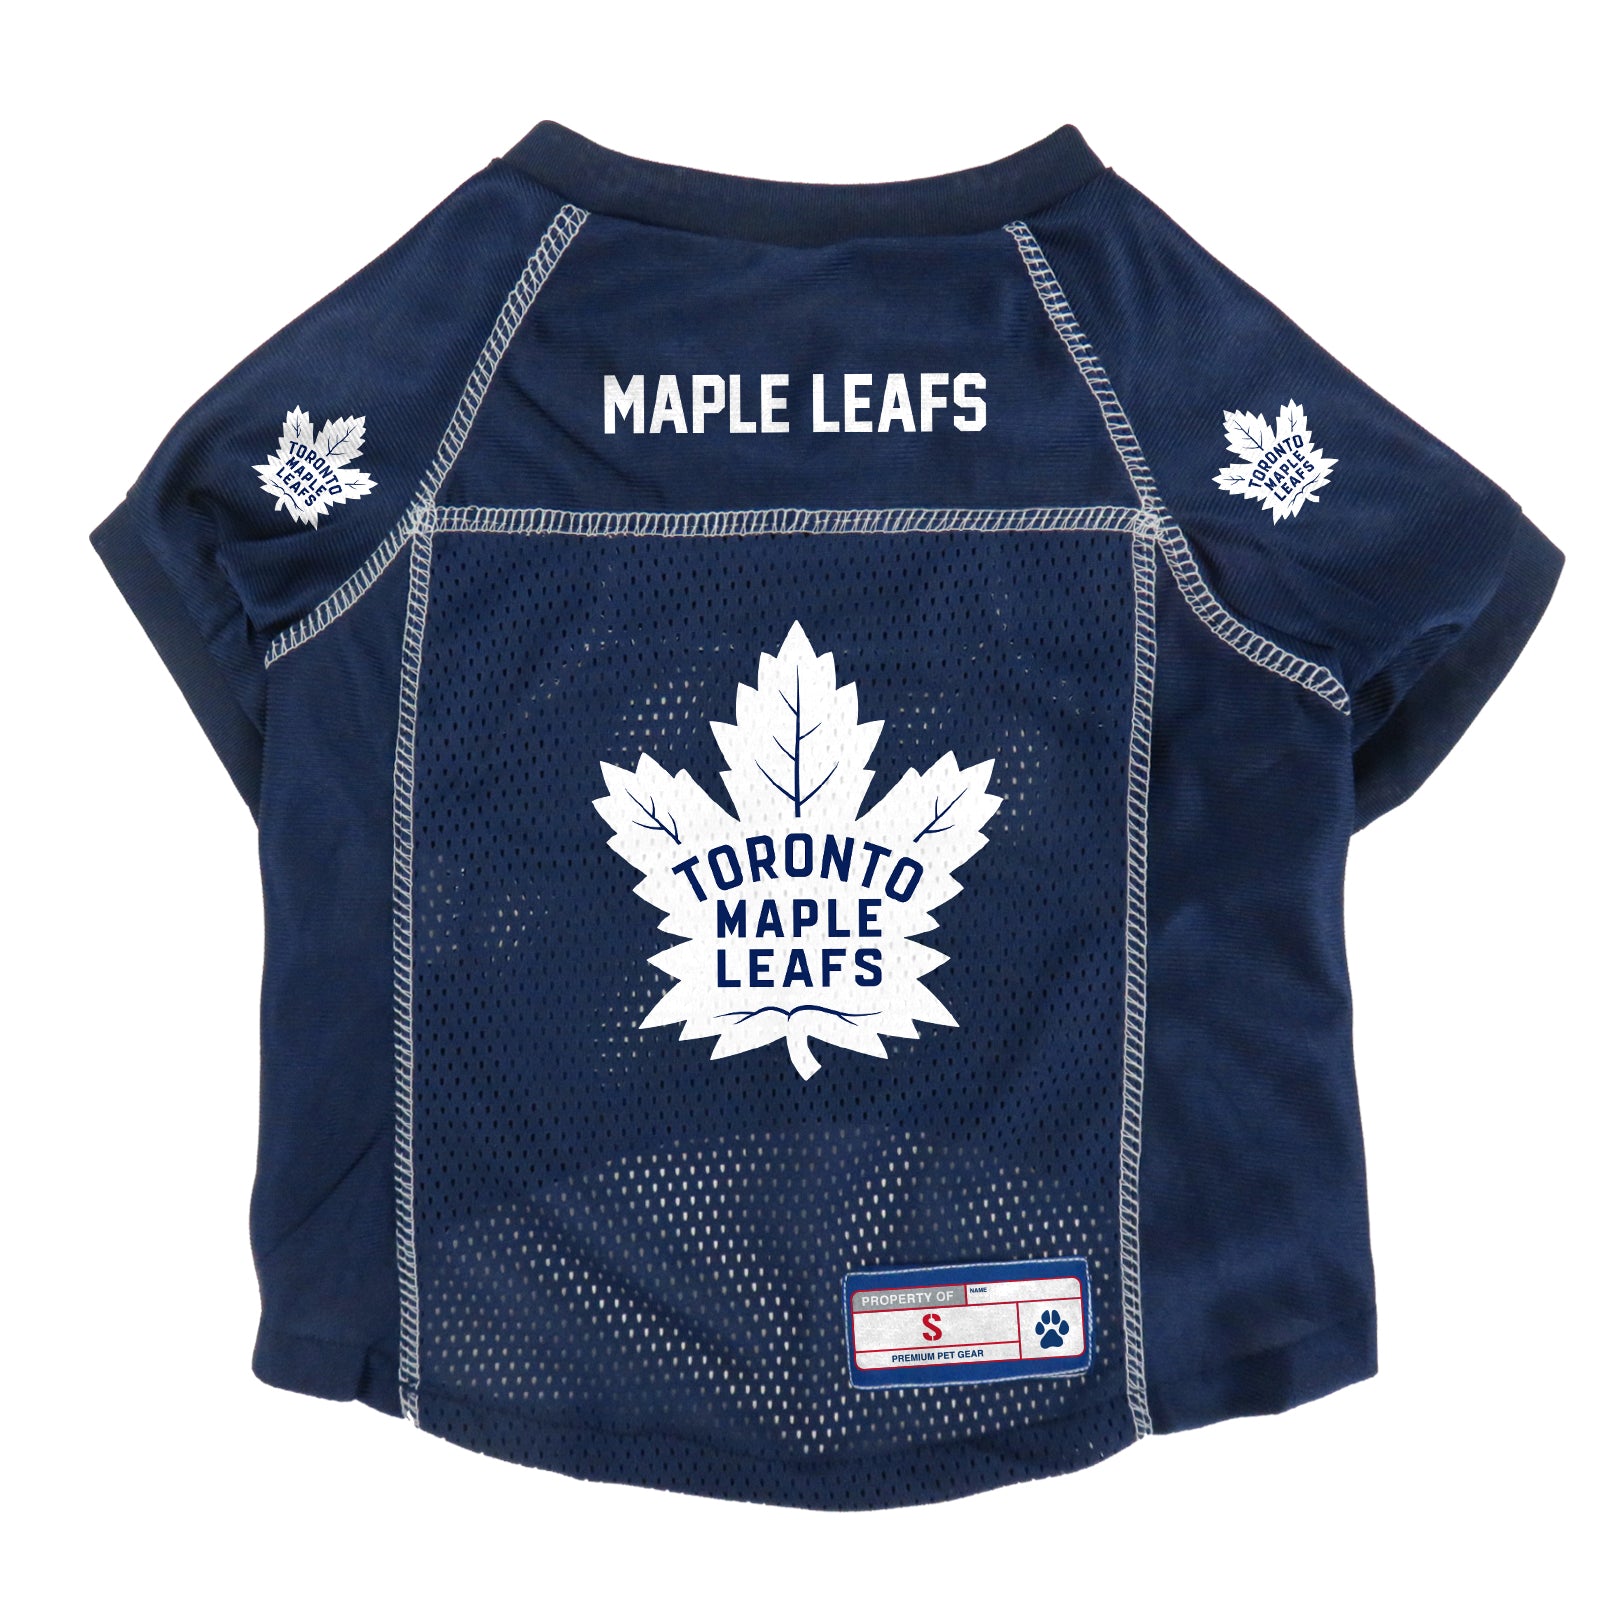 Pets First NHL Toronto Maple Leafs Mesh Jersey for Dogs and Cats - Licensed